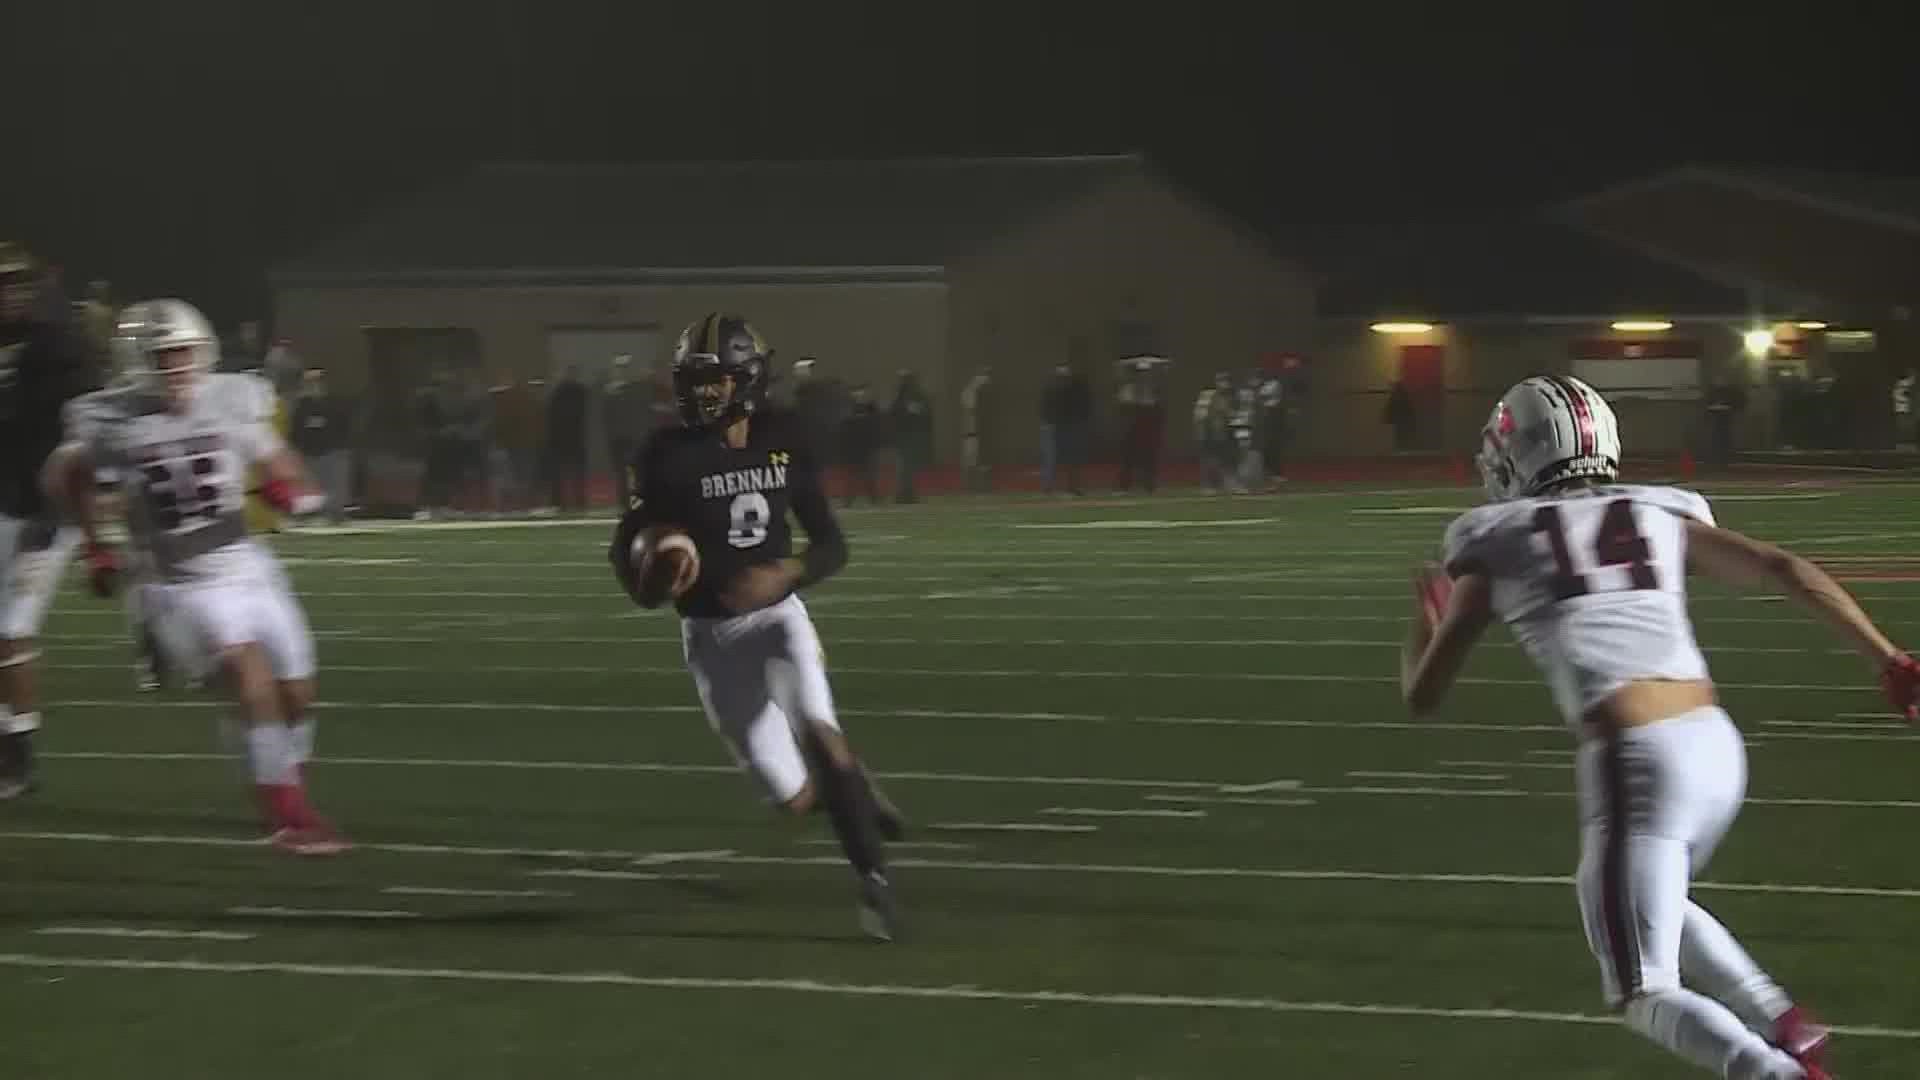 It was a big night for playoff football in South Texas.